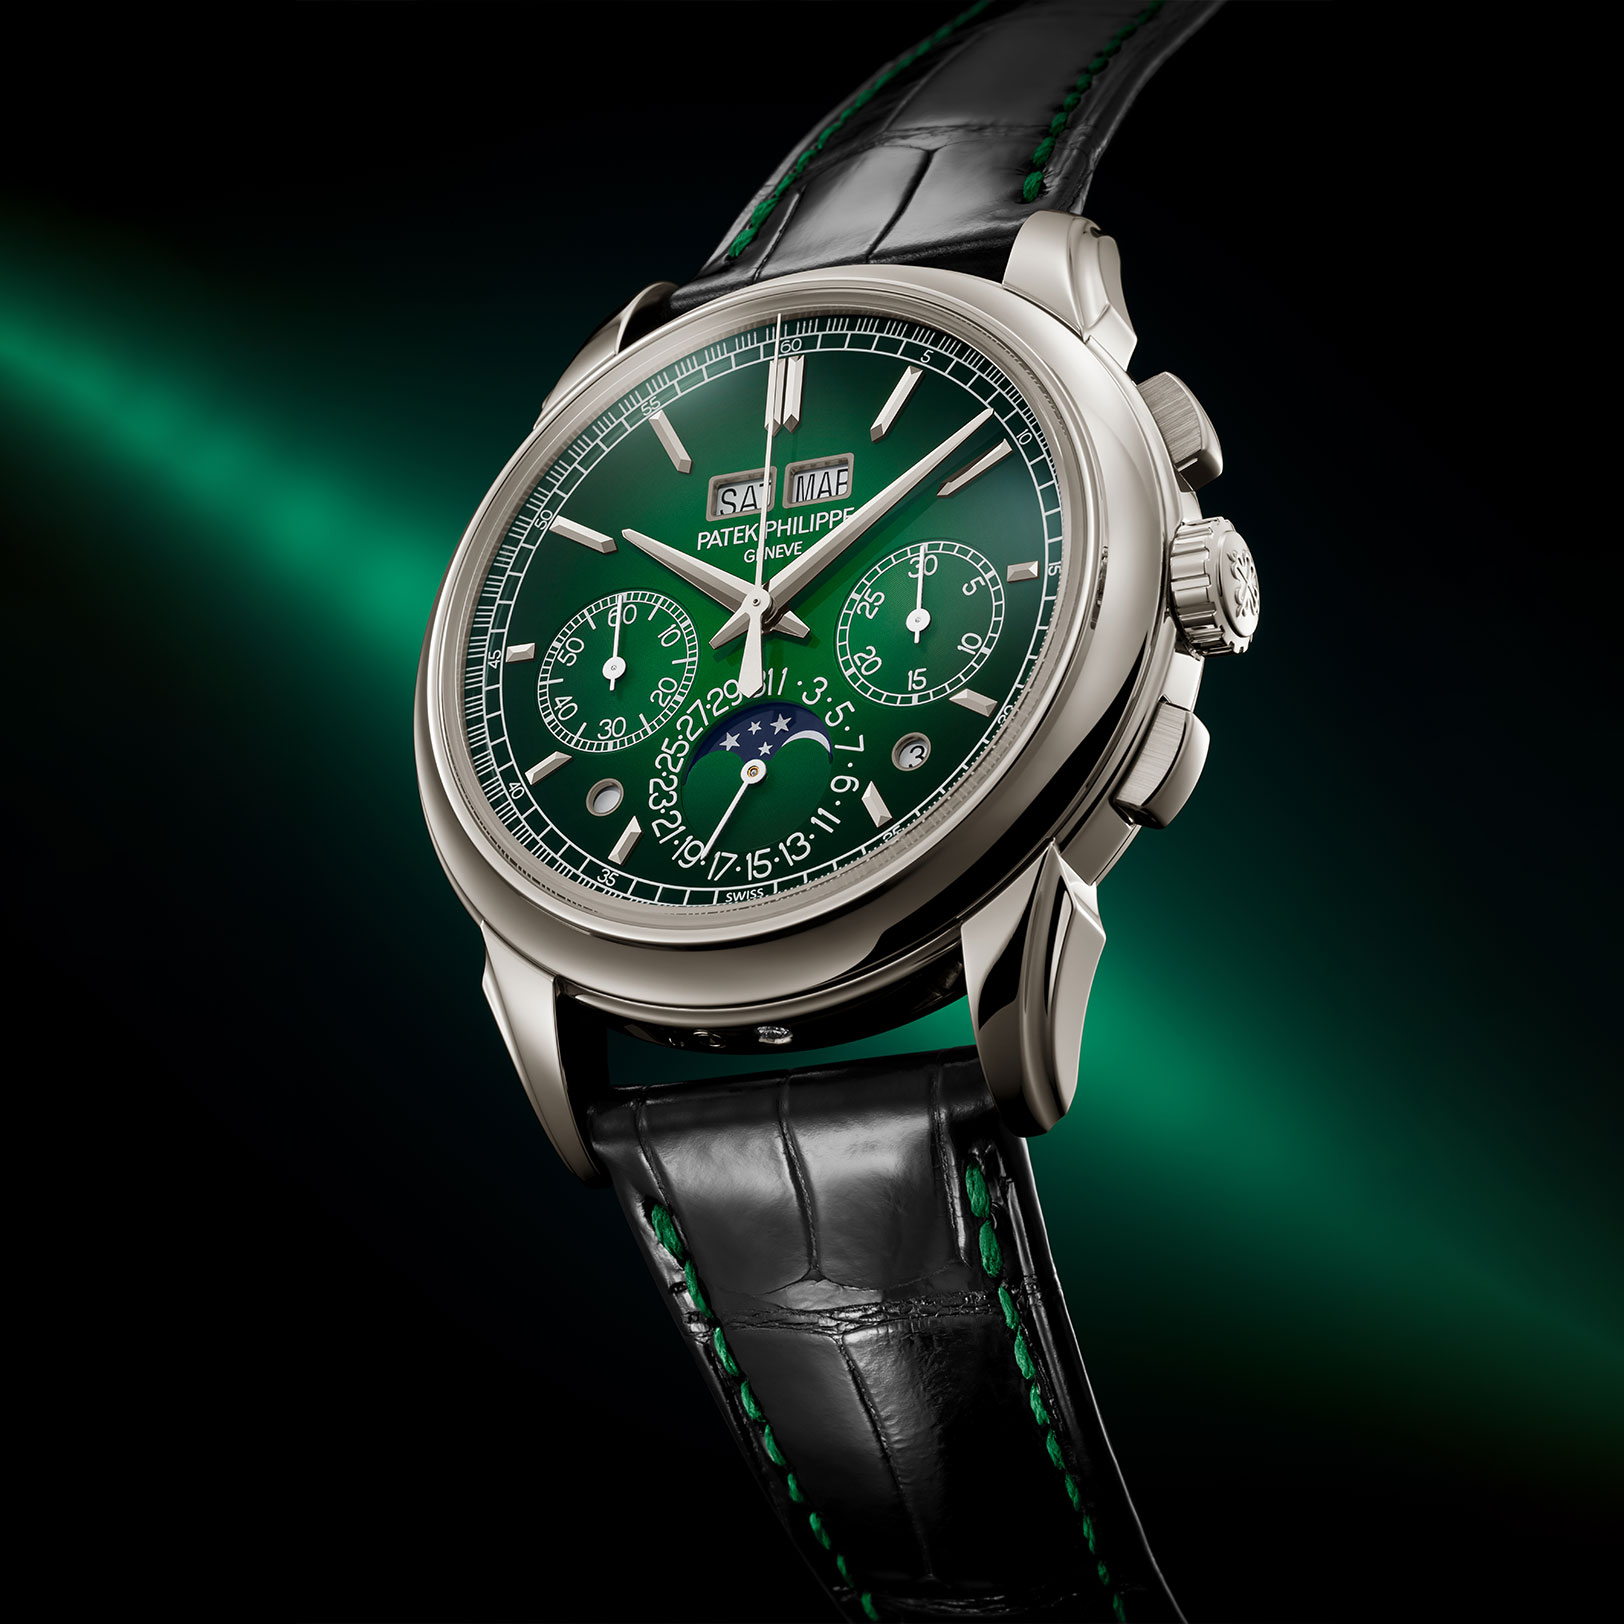 Grand Complications gallery 9